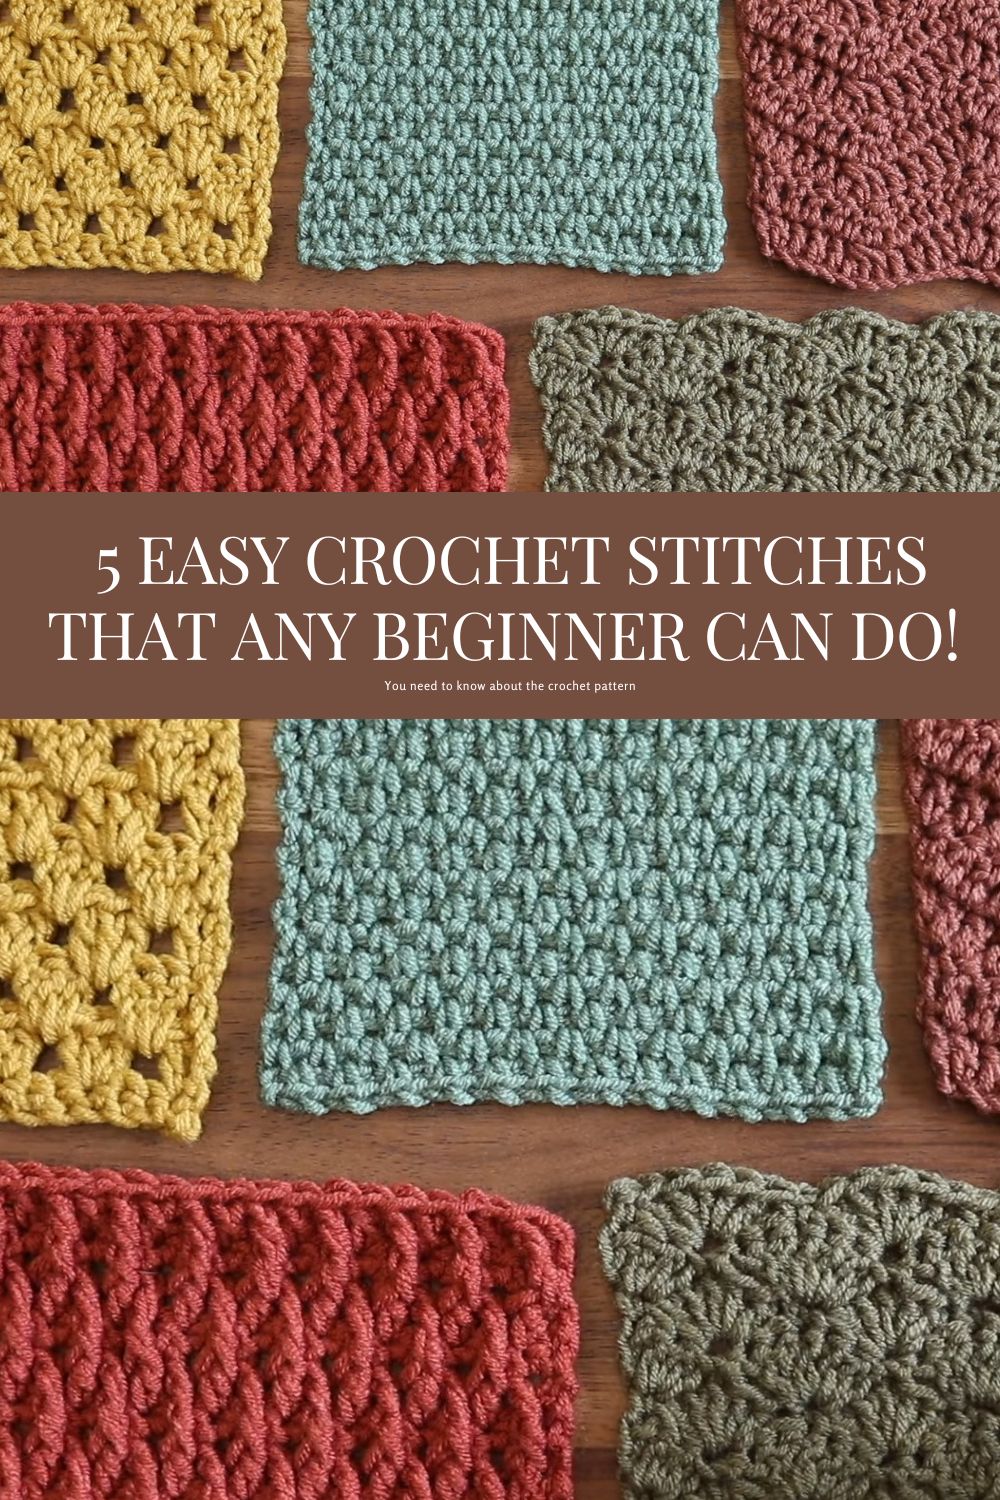 5 EASY CROCHET STITCHES THAT ANY BEGINNER CAN DO!